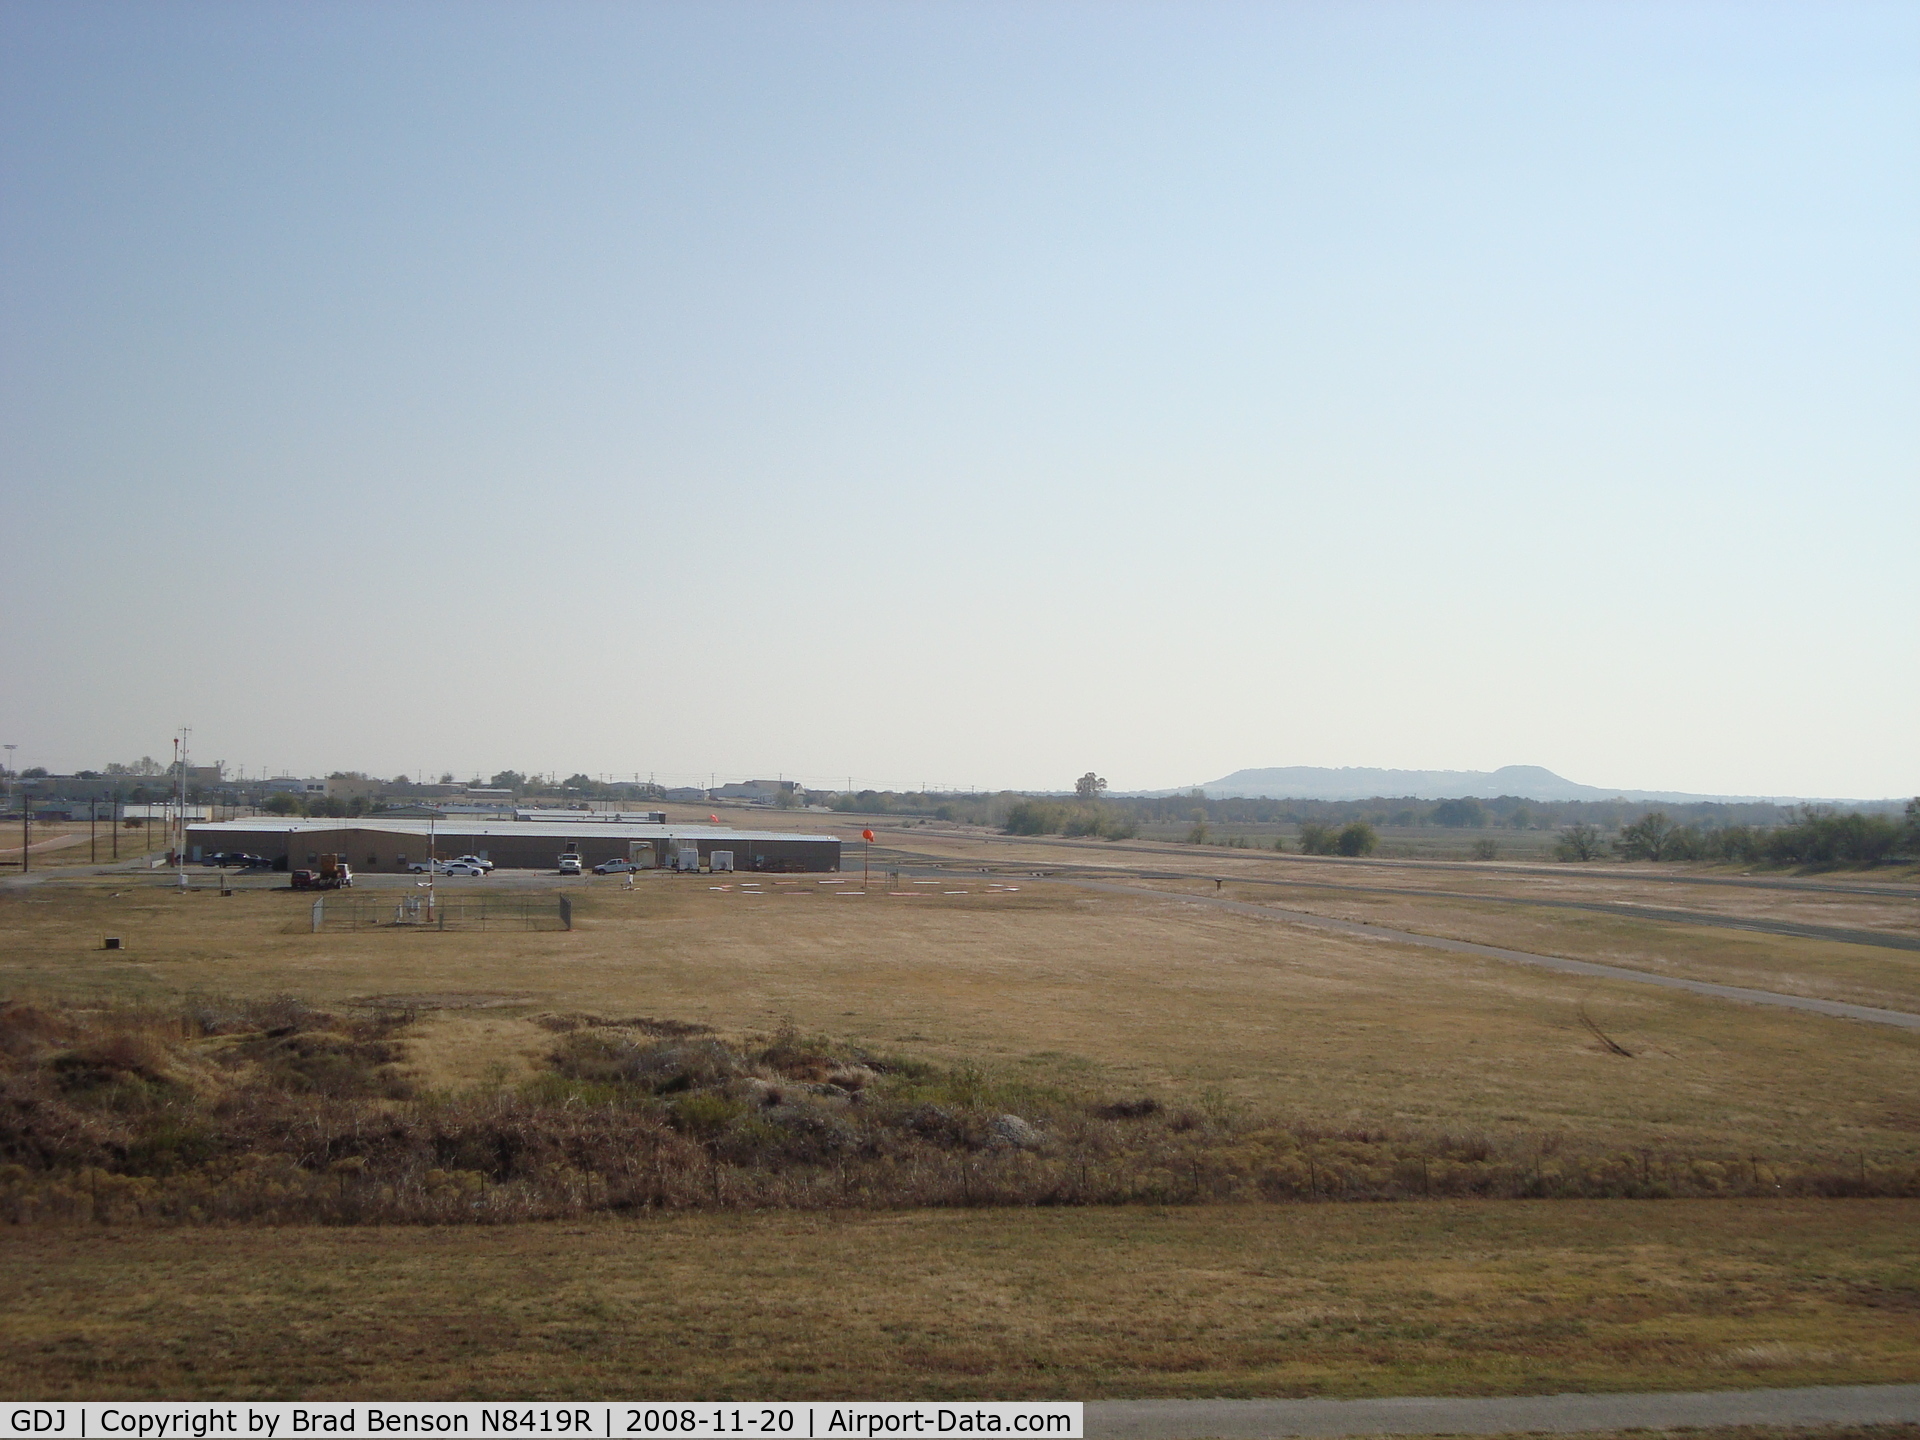 Granbury Regional Airport (GDJ) - View from Fire Department Training Tower on Northeast Side of Airport